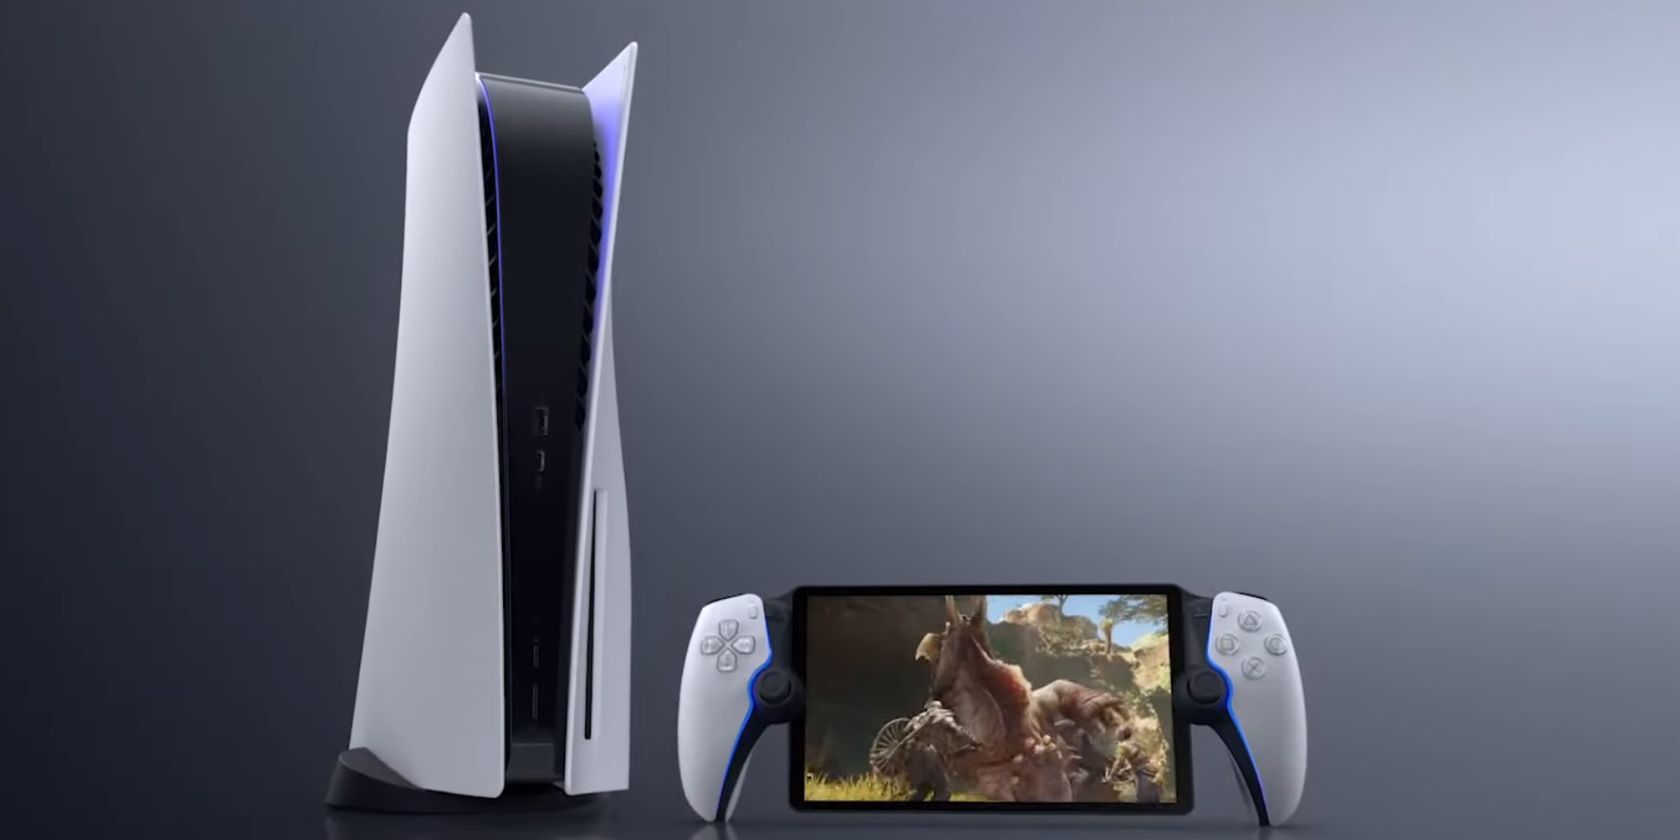 The PS5 Slim just got announced! : r/playstation